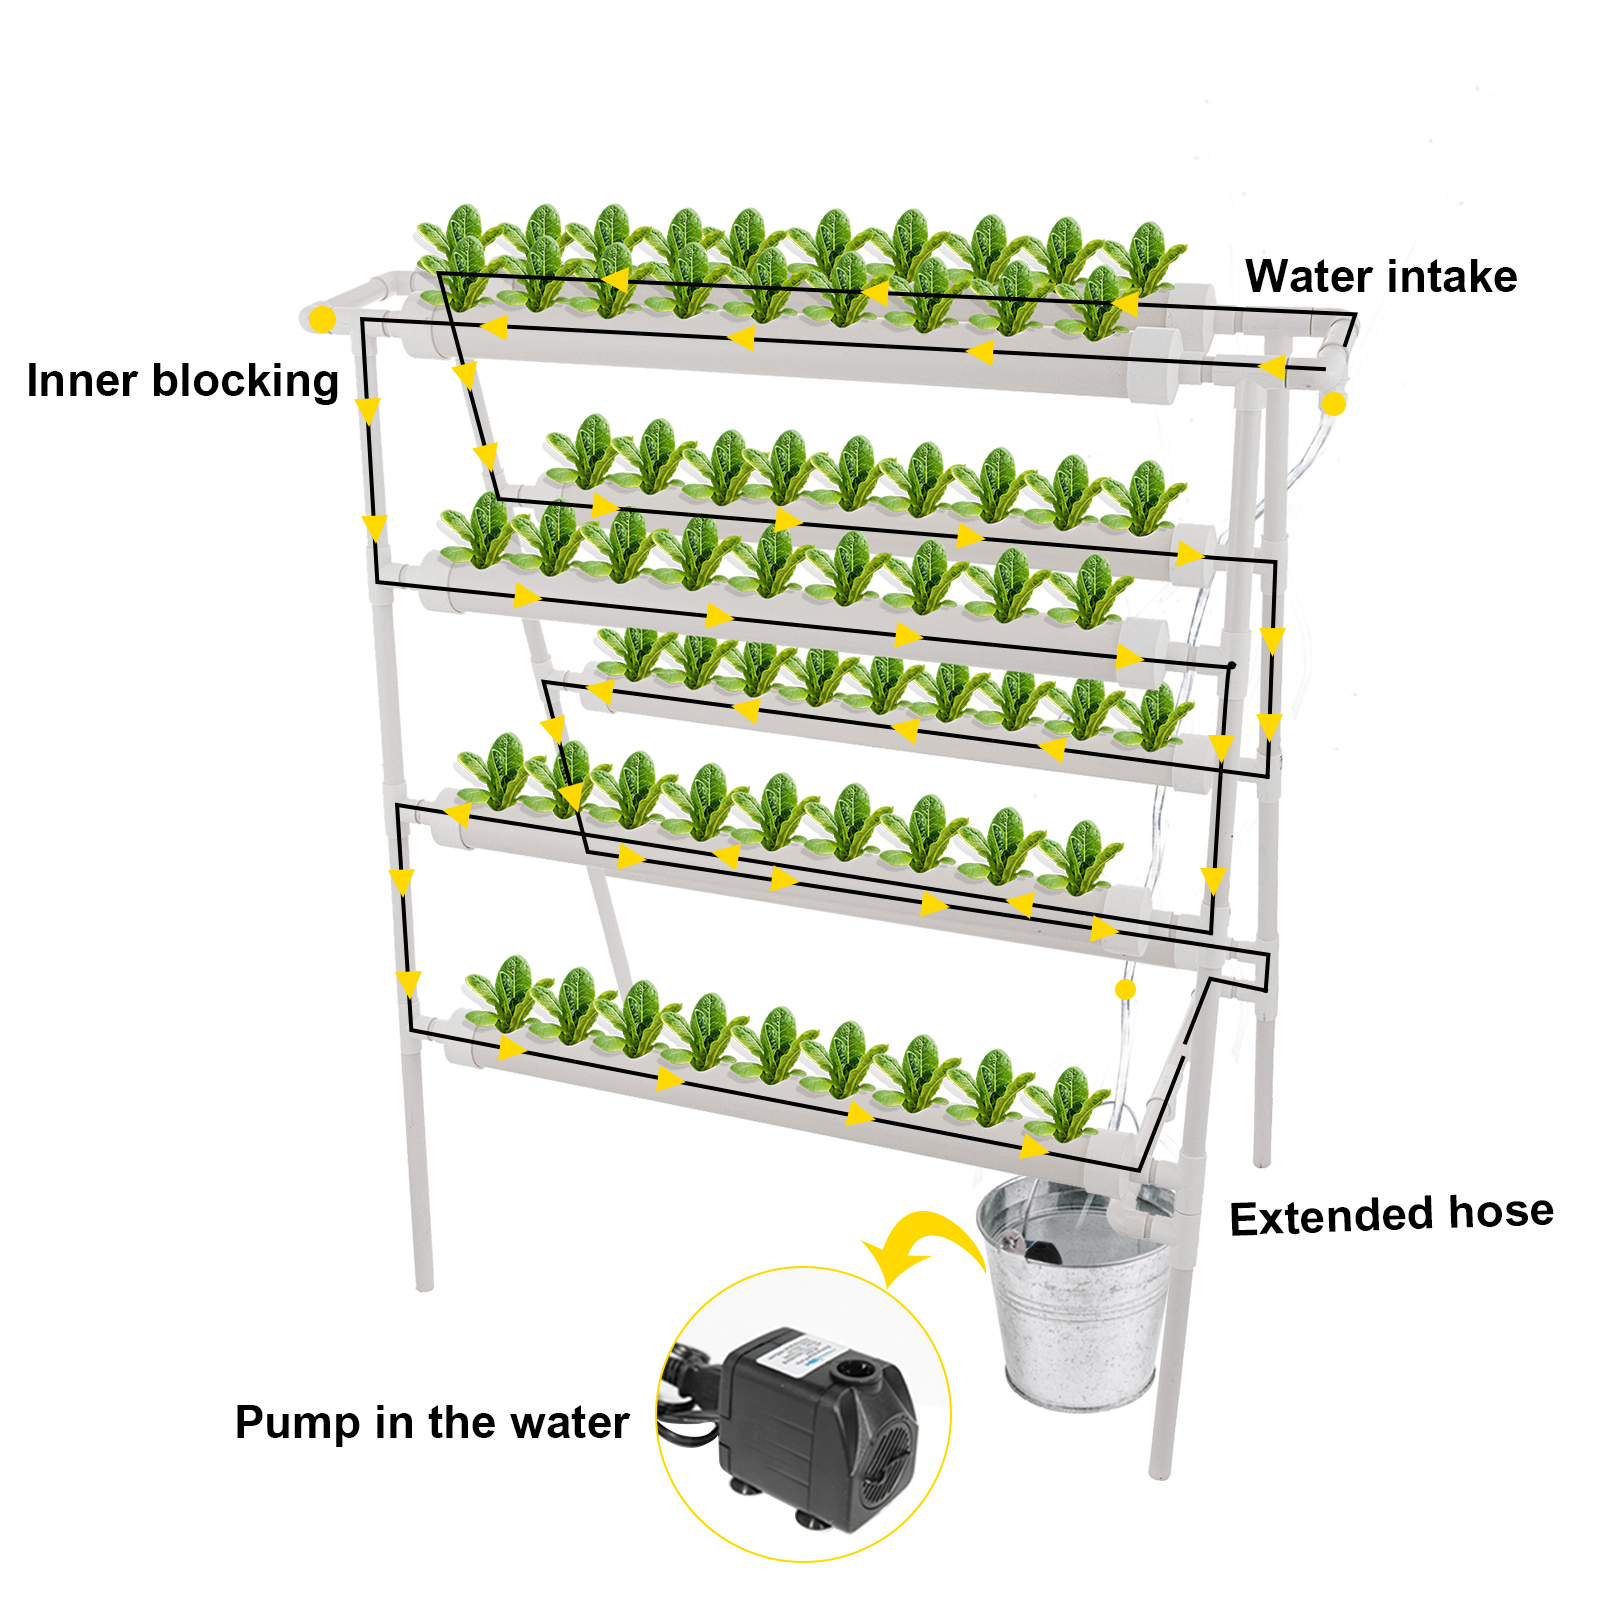 Details about   36 Plant Ladder Type Hydroponic Site Grow Kit Soilless Culture Vegetable Plant 